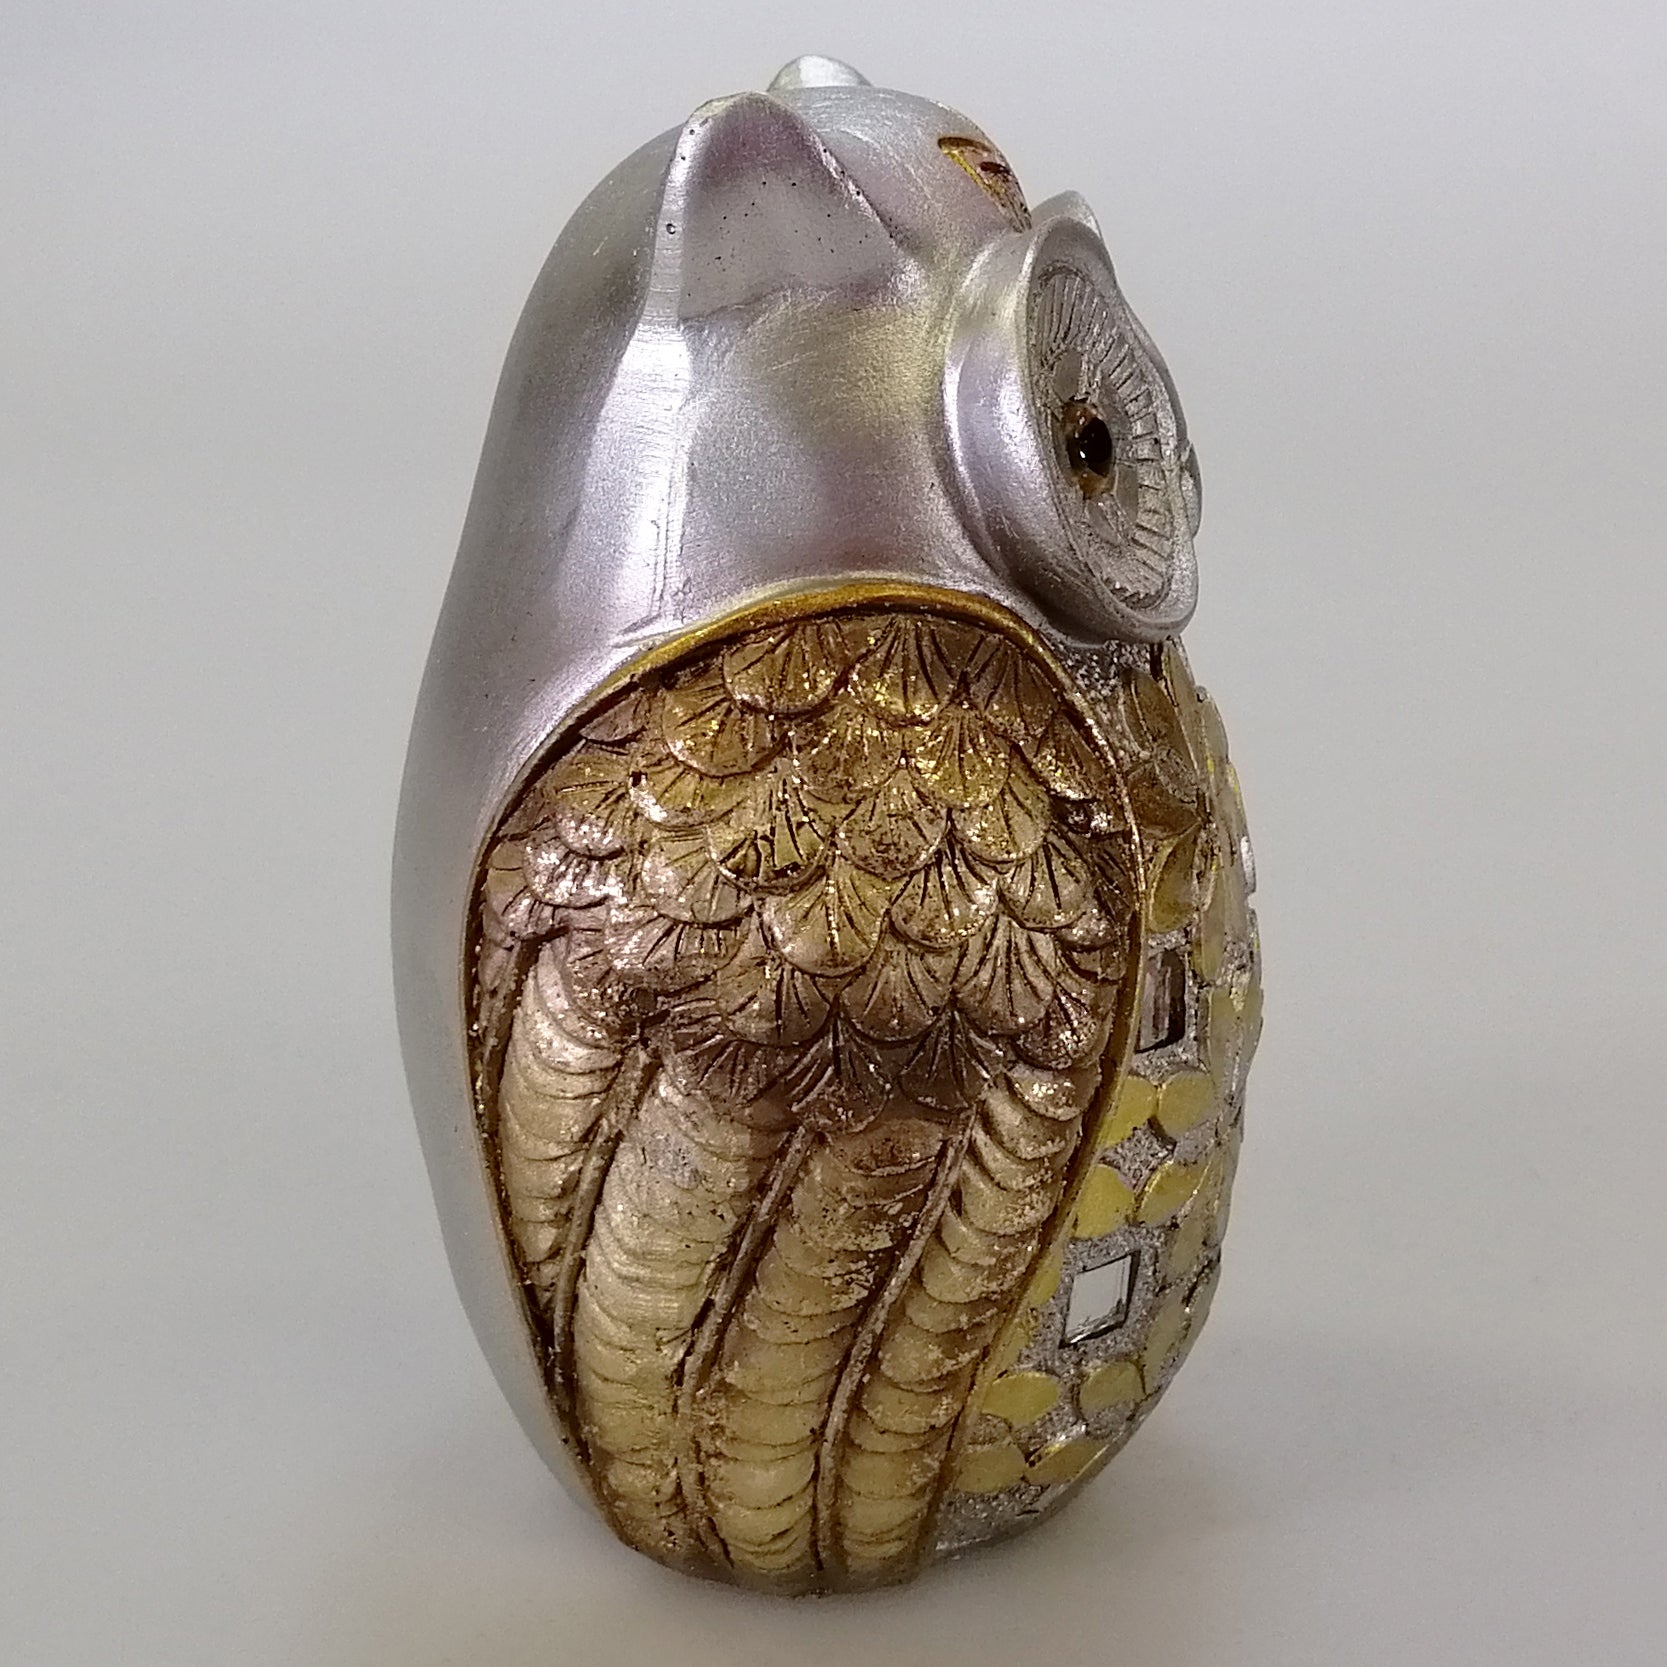 Gold Painted Owl 10cm